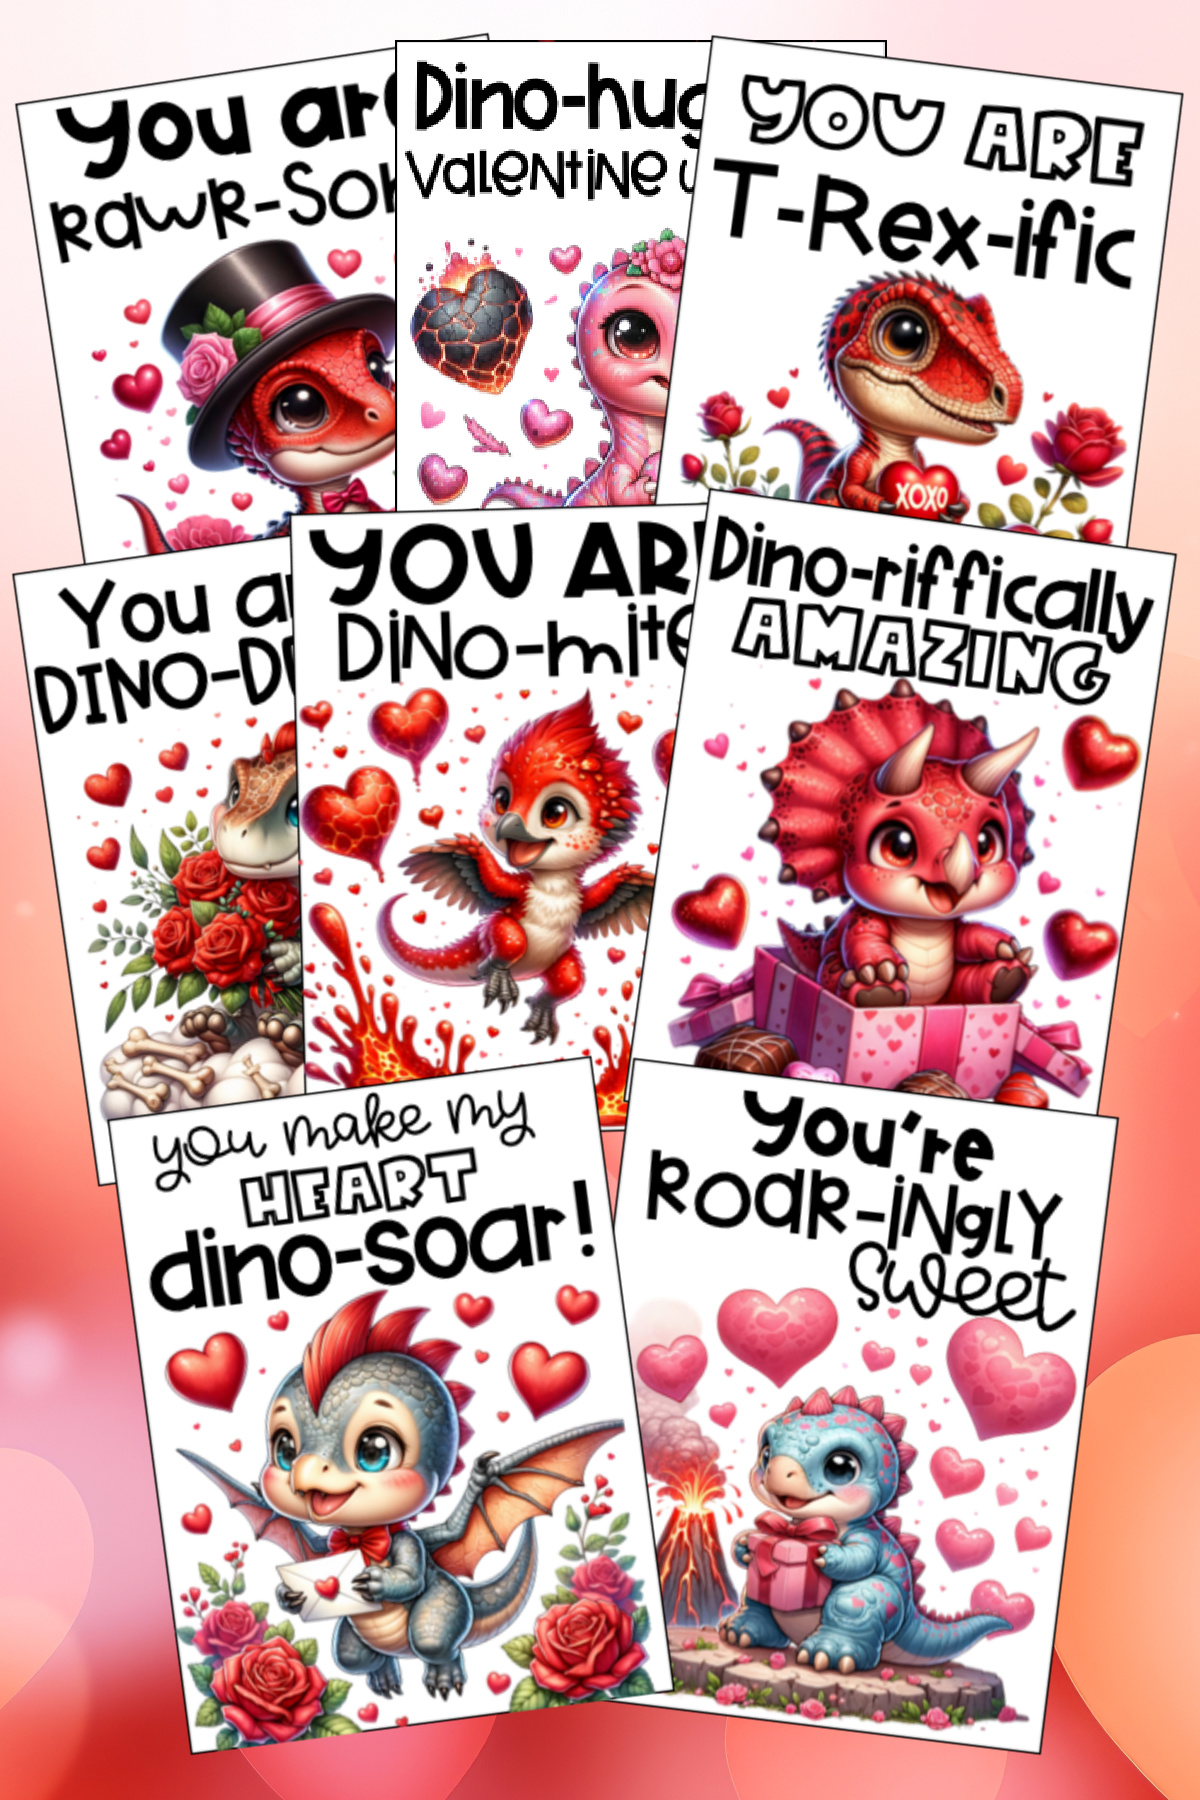 Free printable valentine's day cards with dinosaurs